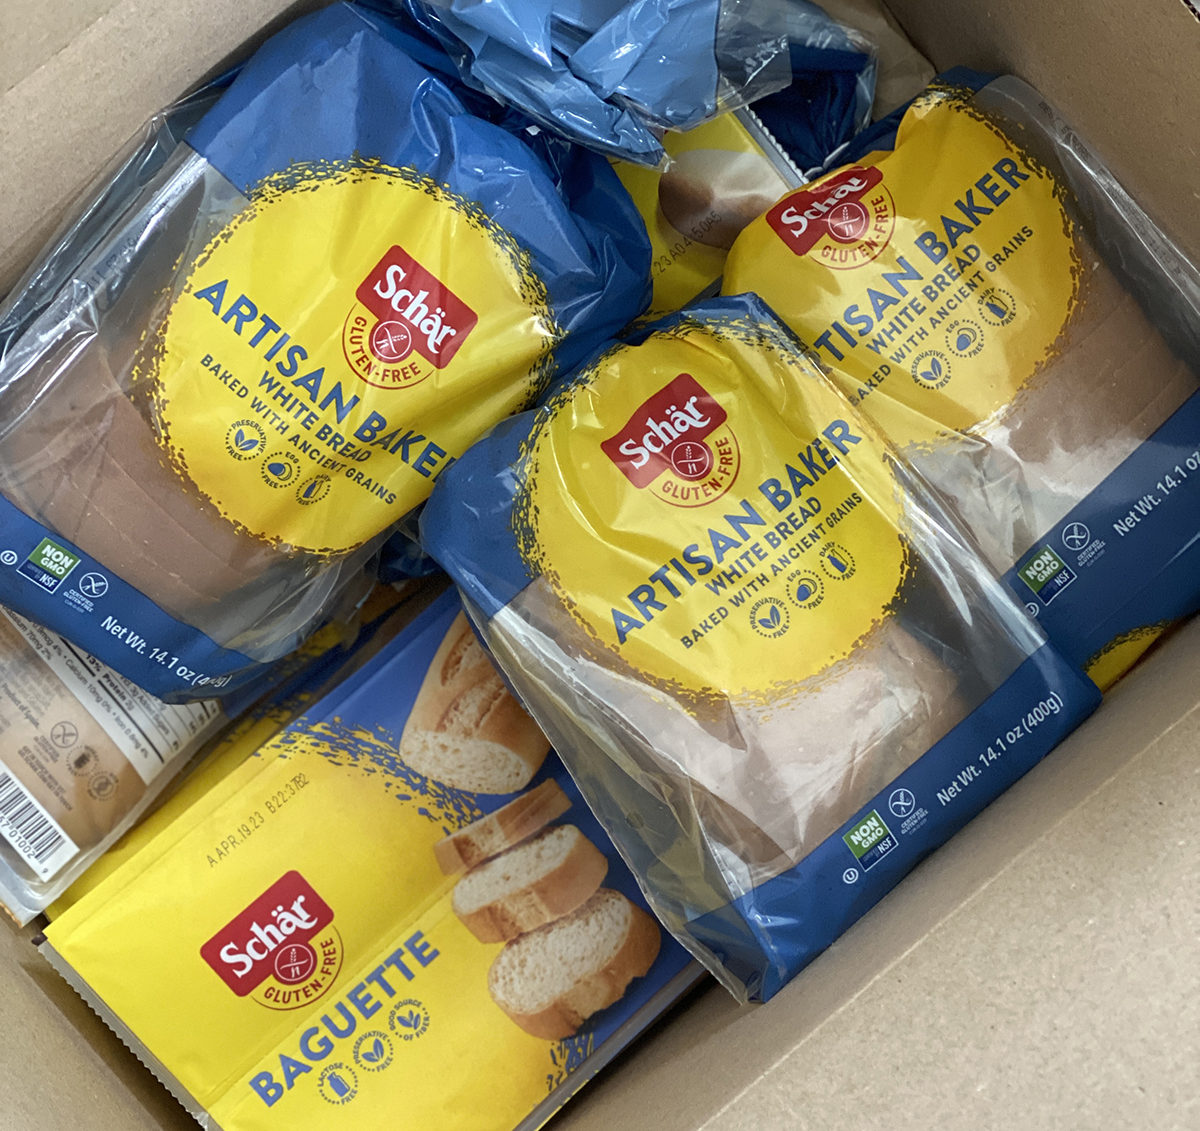 Cardboard box full of Schar gluten-free bread and baguettes on top of other gluten-free groceries. 